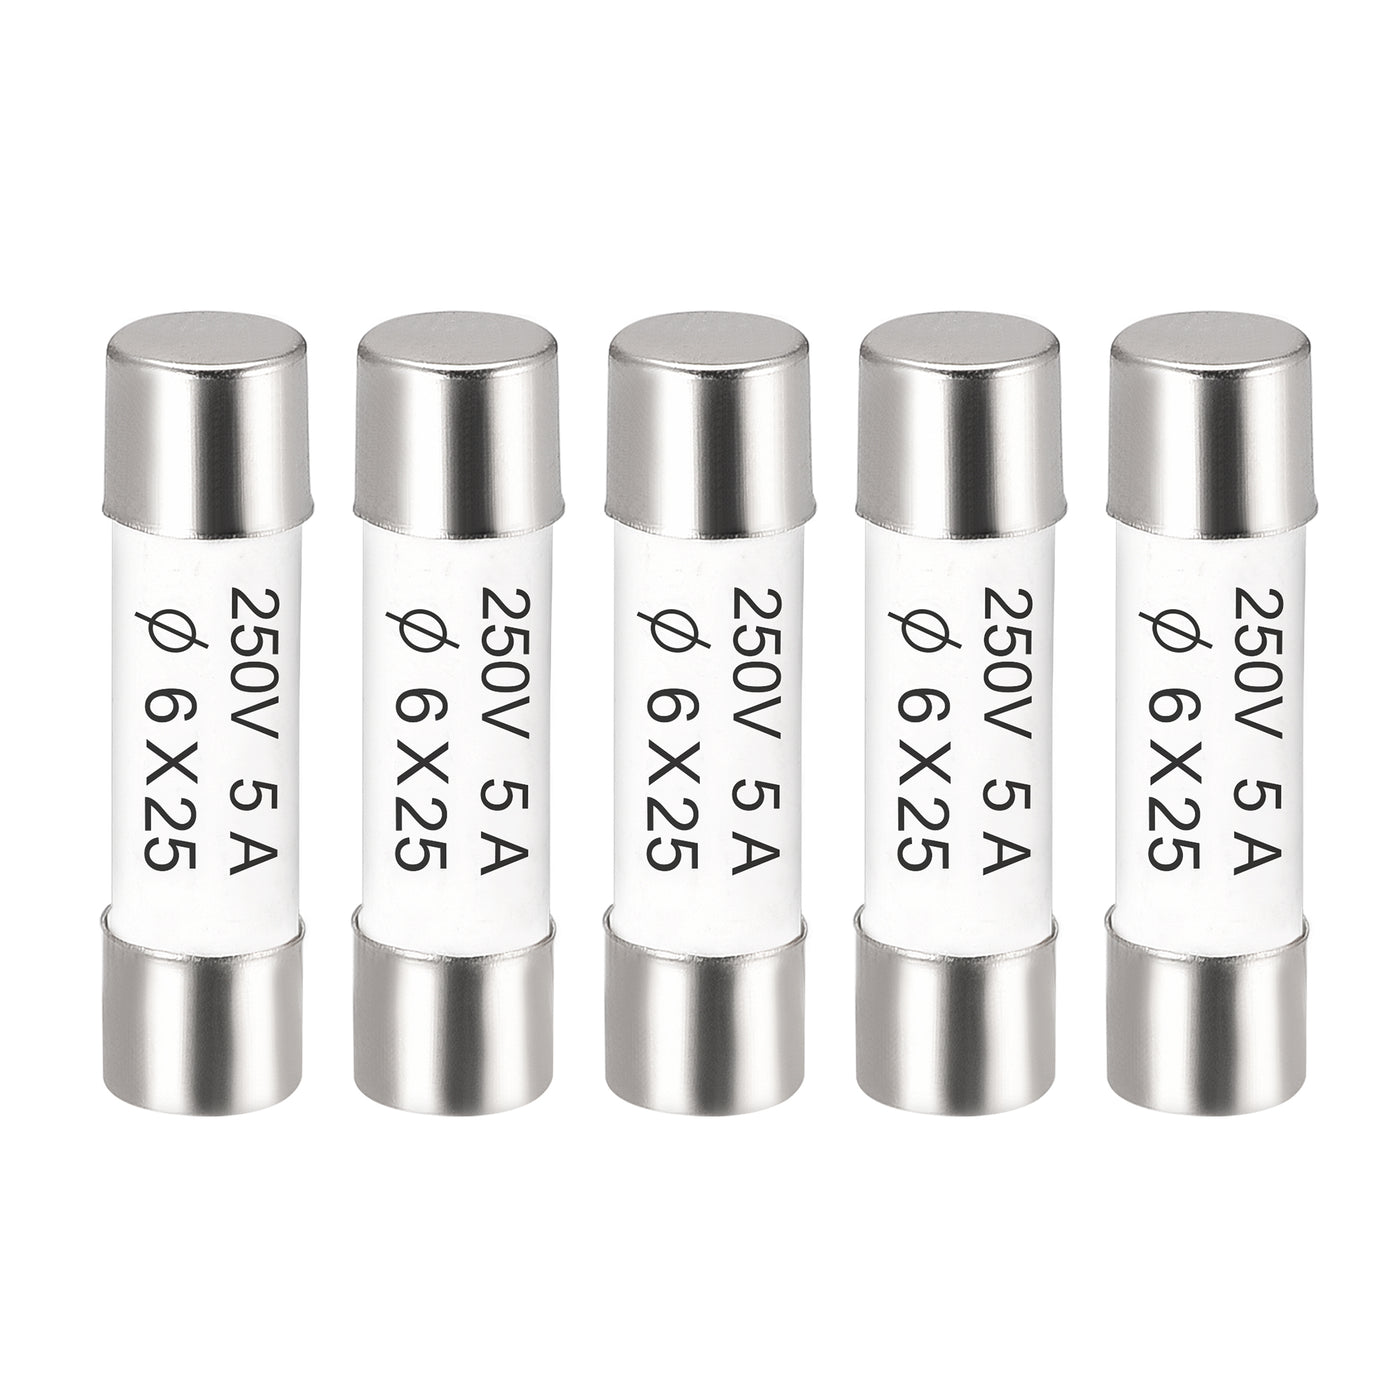 uxcell Uxcell Ceramic Cartridge Fuses 5A 250V 6x25mm Fast Blow for Energy Saving Lamp 5pcs